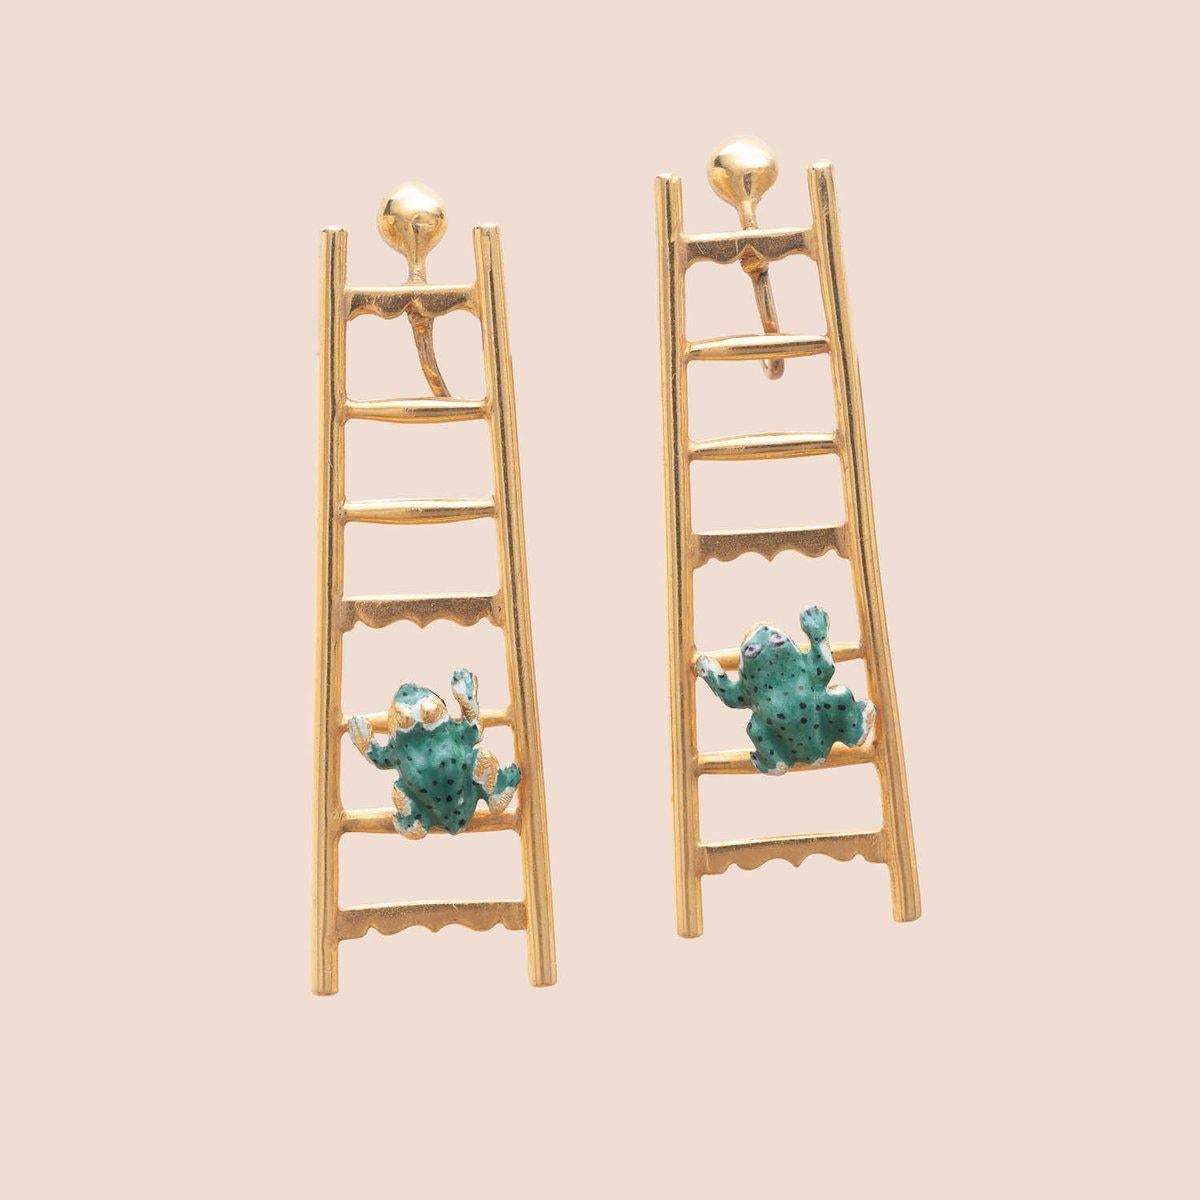 Unique and quirky 18K gold earrings featuring enamel frogs on ladders 
French craftsmanship from the 1910s
Lenght : 45mm
Gross weight : 10.42g 

___________________

Paire de pendants d’oreilles en or jaune 18K, 750/°° chacune composée d’une échelle